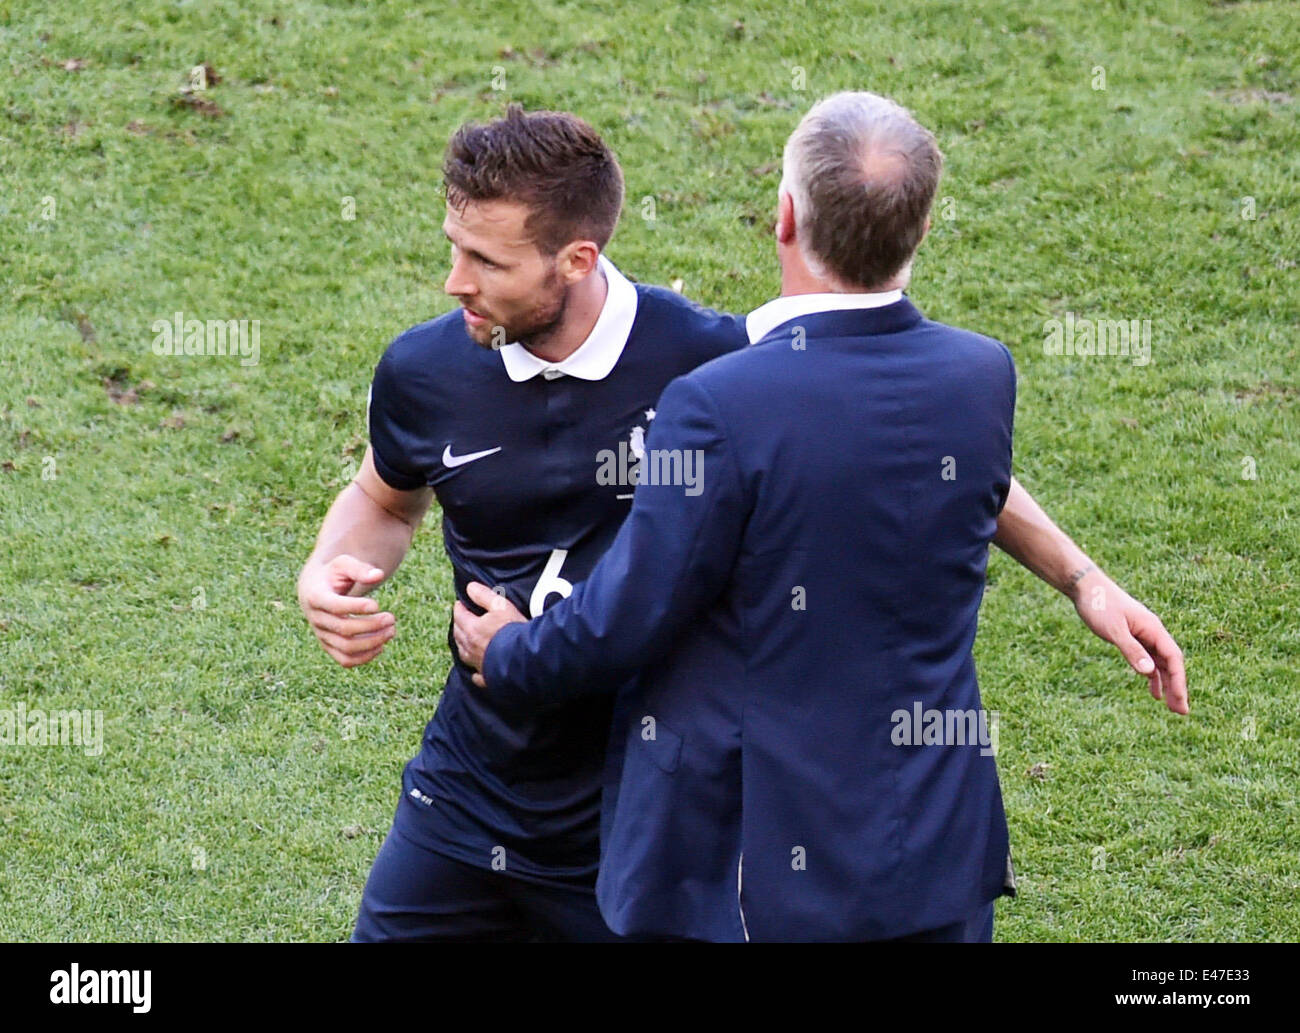 Rio de Janeiro, Brazil. 04th July, 2014. Head coch Didier Deschamps of France hugs his substituted player Yohan Cabaye during the FIFA World Cup 2014 quarter final soccer match between France and Germany at Estadio do Maracana in Rio de Janeiro, Brazil, 04 July 2014. Photo: Marcus Brandt/dpa/Alamy Live News Stock Photo